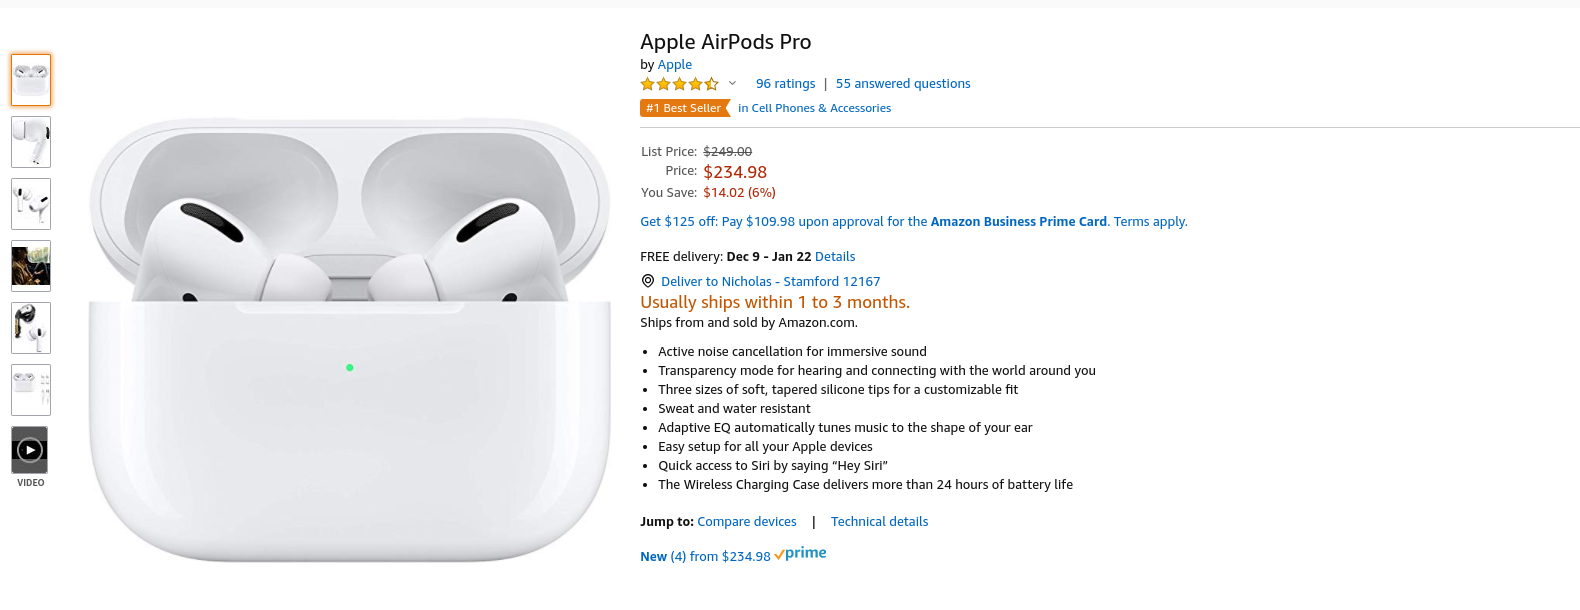 (EXPIRED) Apple AirPods Pro as low as $188 w/ stacking offers at Amazon